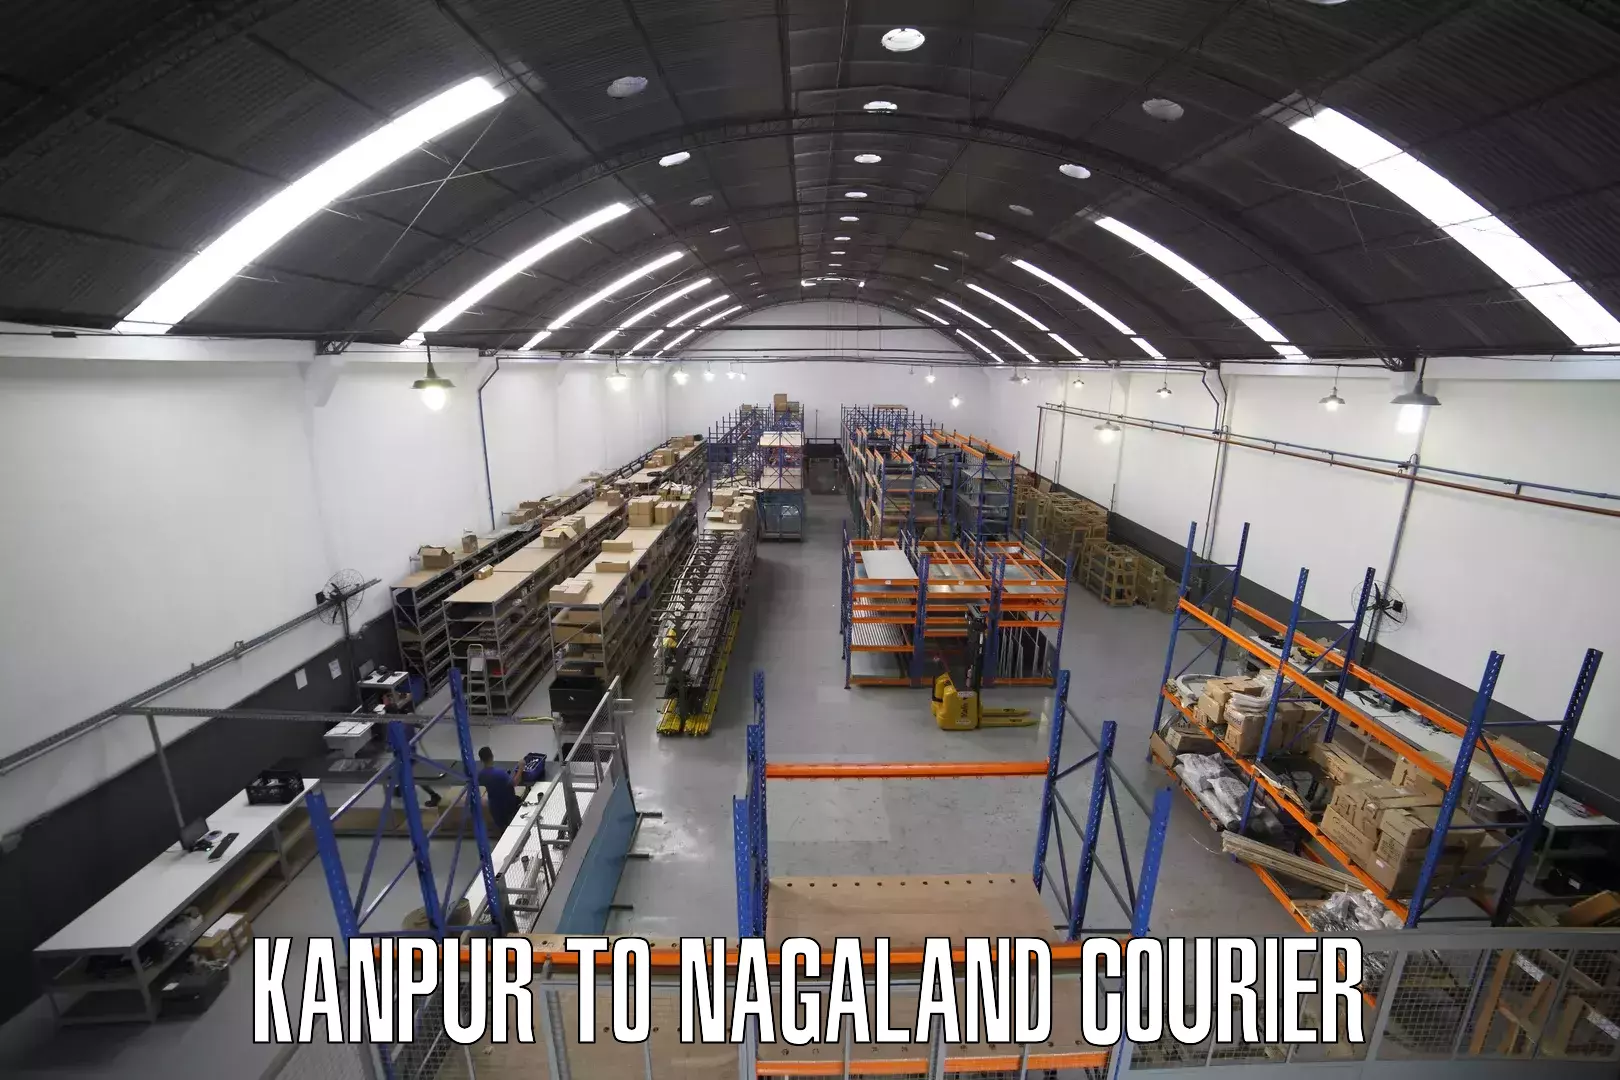 Courier service efficiency Kanpur to Nagaland